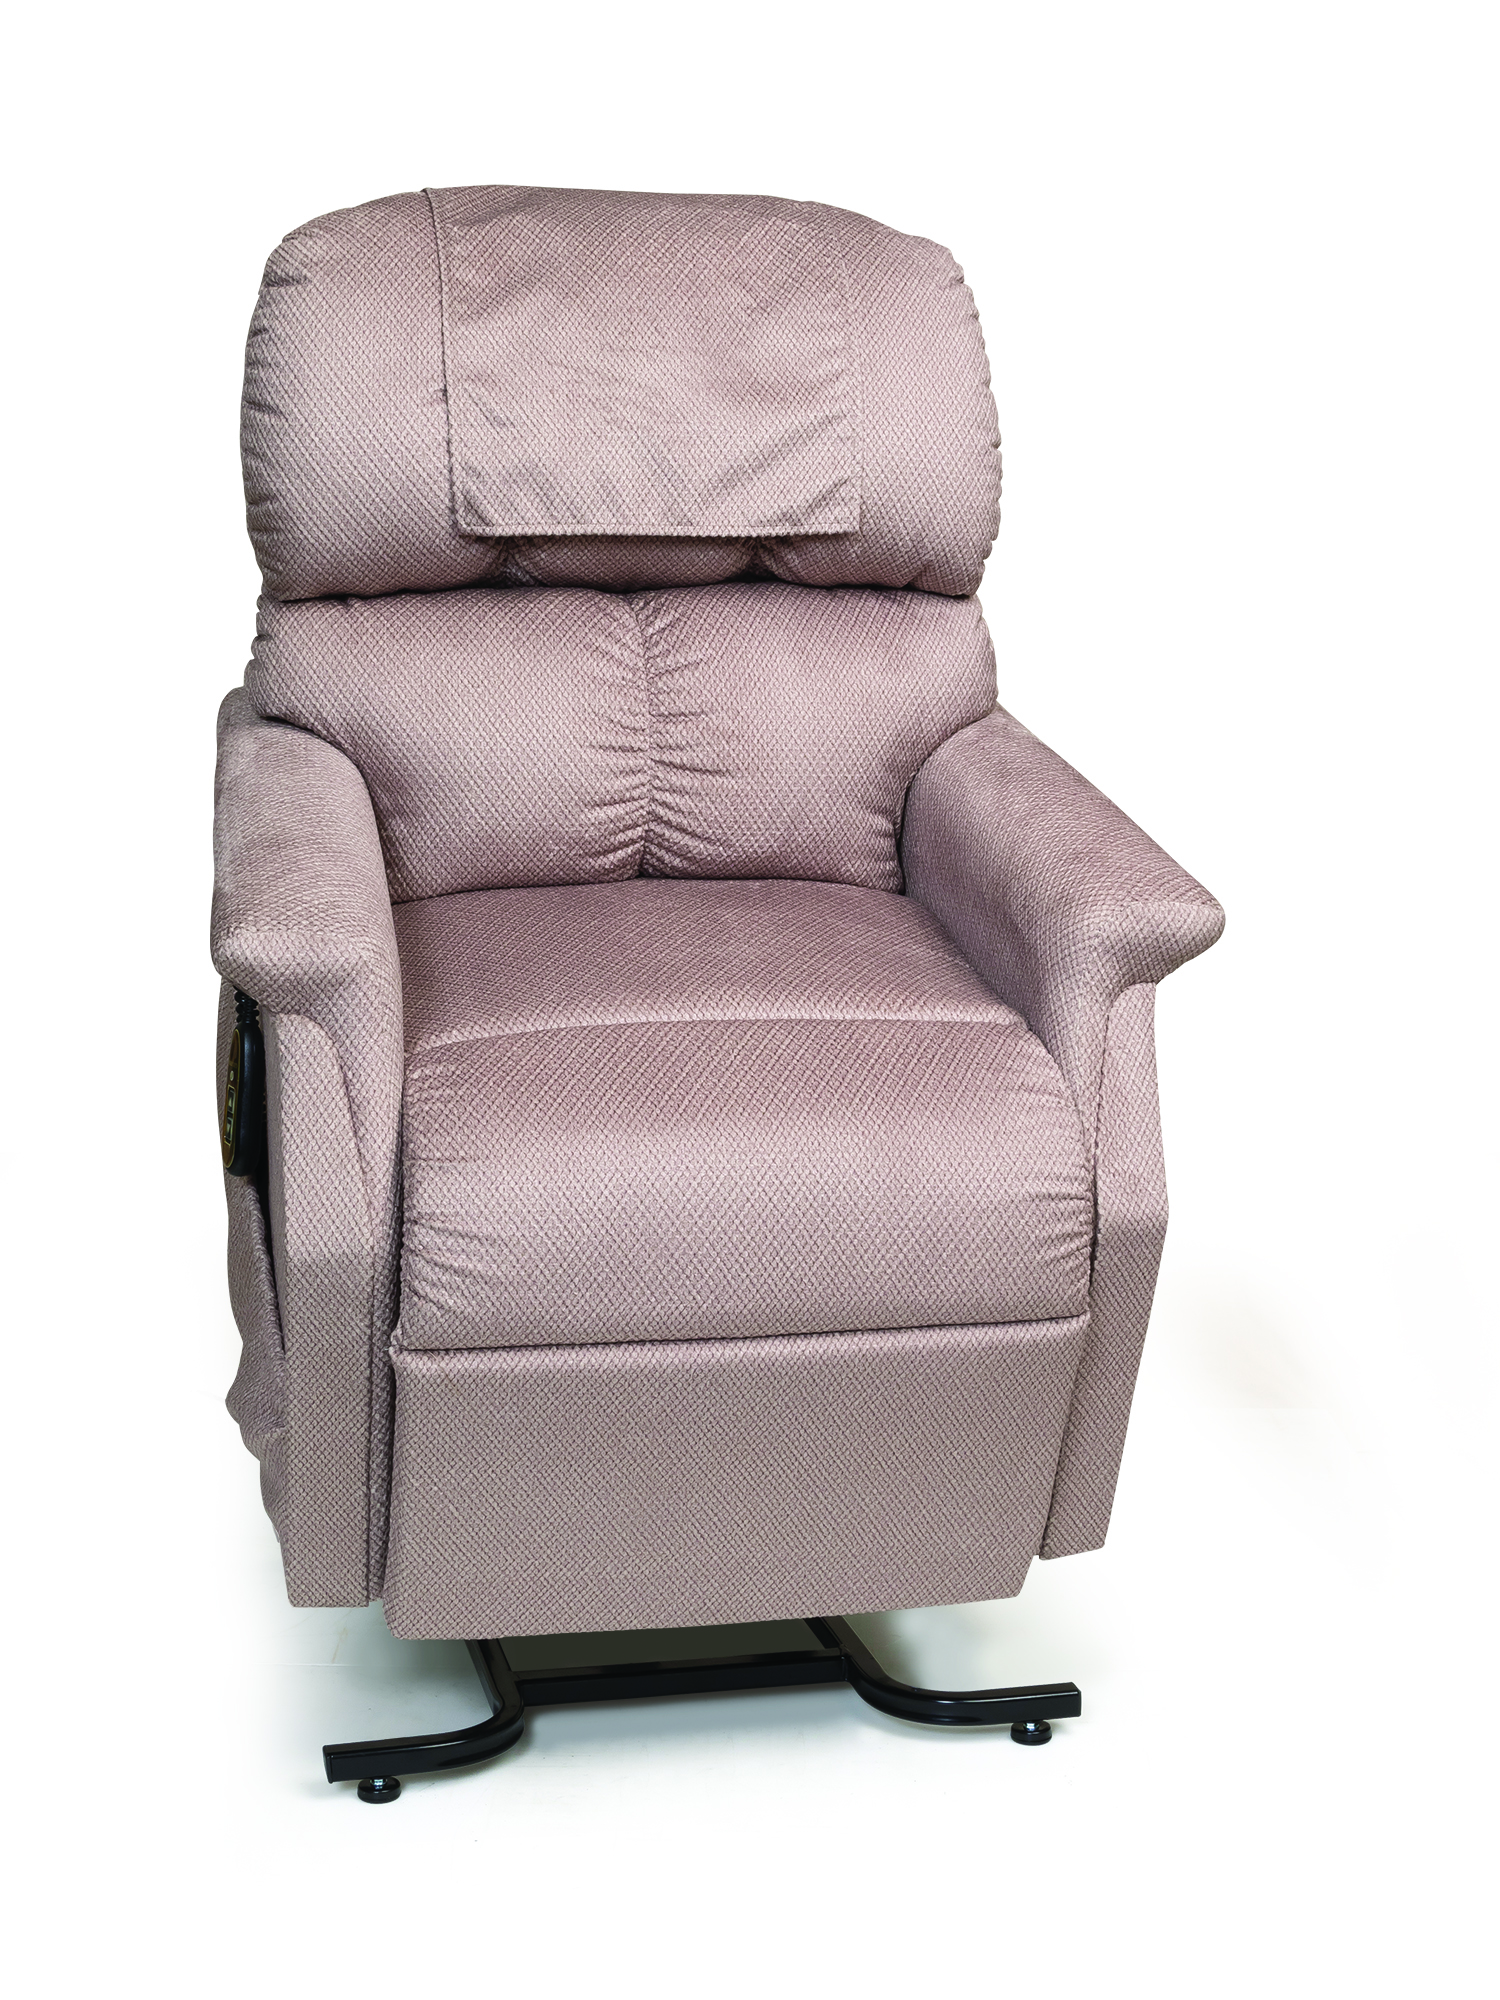 Photo of Golden Technologies Comforter Lift Chair, Size Small